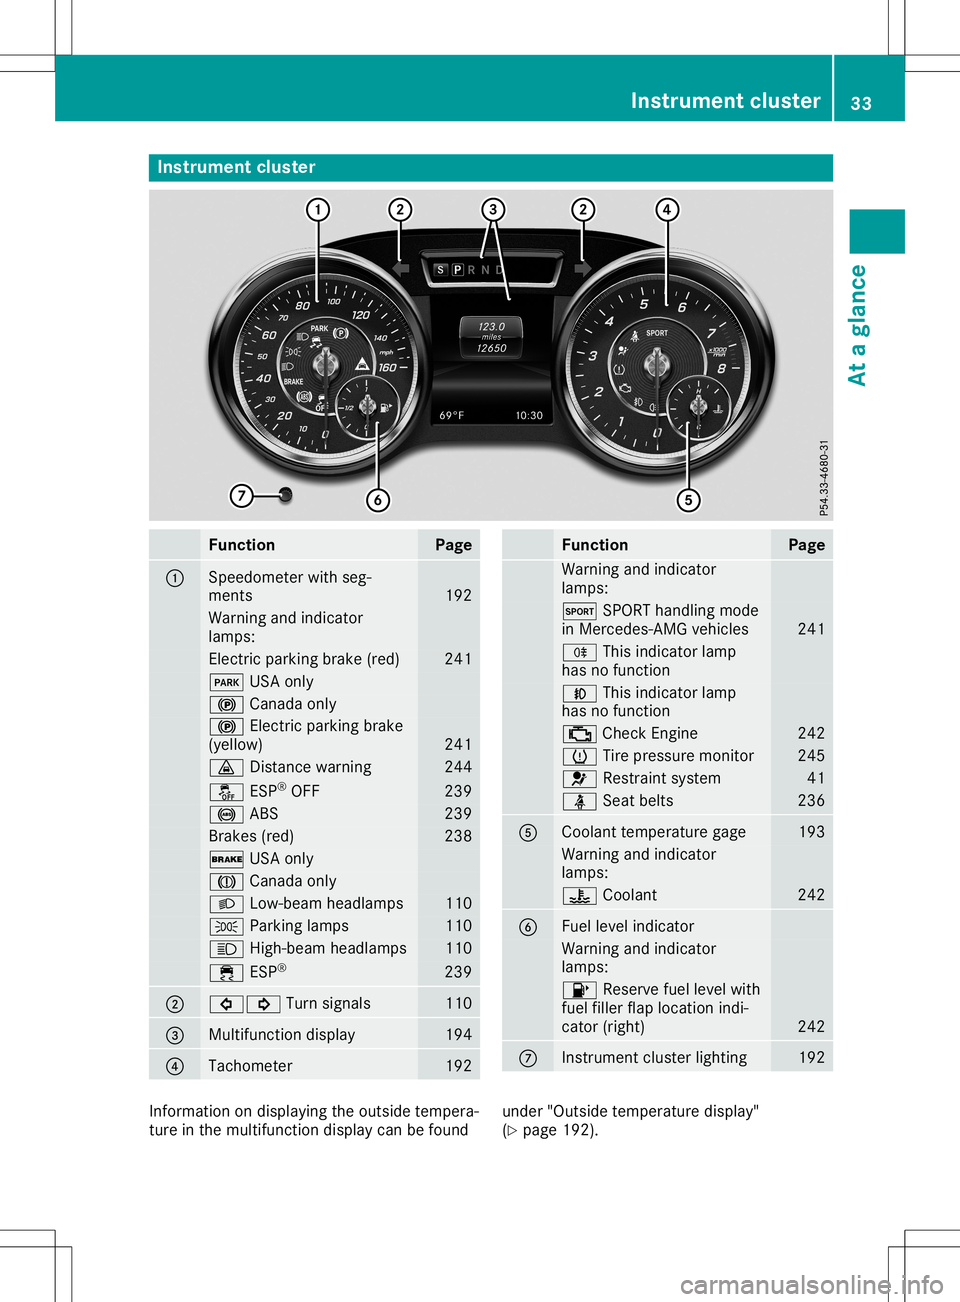 MERCEDES-BENZ SL ROADSTER 2020  Owners Manual Inst
rumen tclus ter Funct
ion Pag
e 0043
Sp
eedo meterwit hseg -
men ts 19
2 Warn
ingand indicat or
lamp s: El
ec tric park ingbrak e(re d) 24
1 0049
USAon ly 0024
Canad aon ly 0024
Elec tric park in